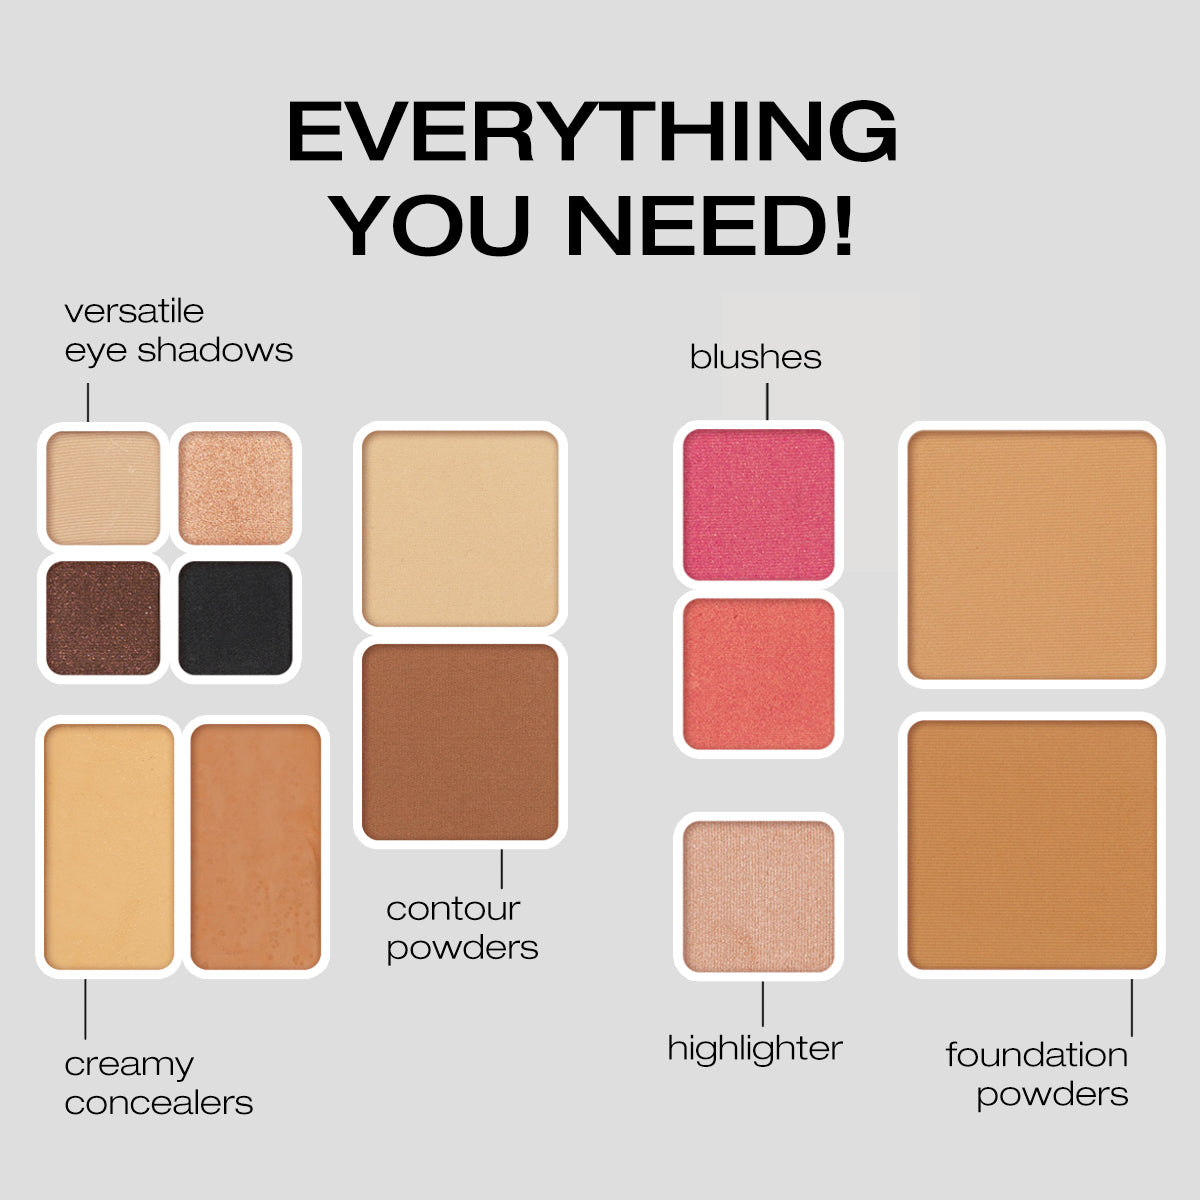 Everything you need: Versatile eye shadows, creamy concealers, contour powders, blushes, highlighter, foundation powders